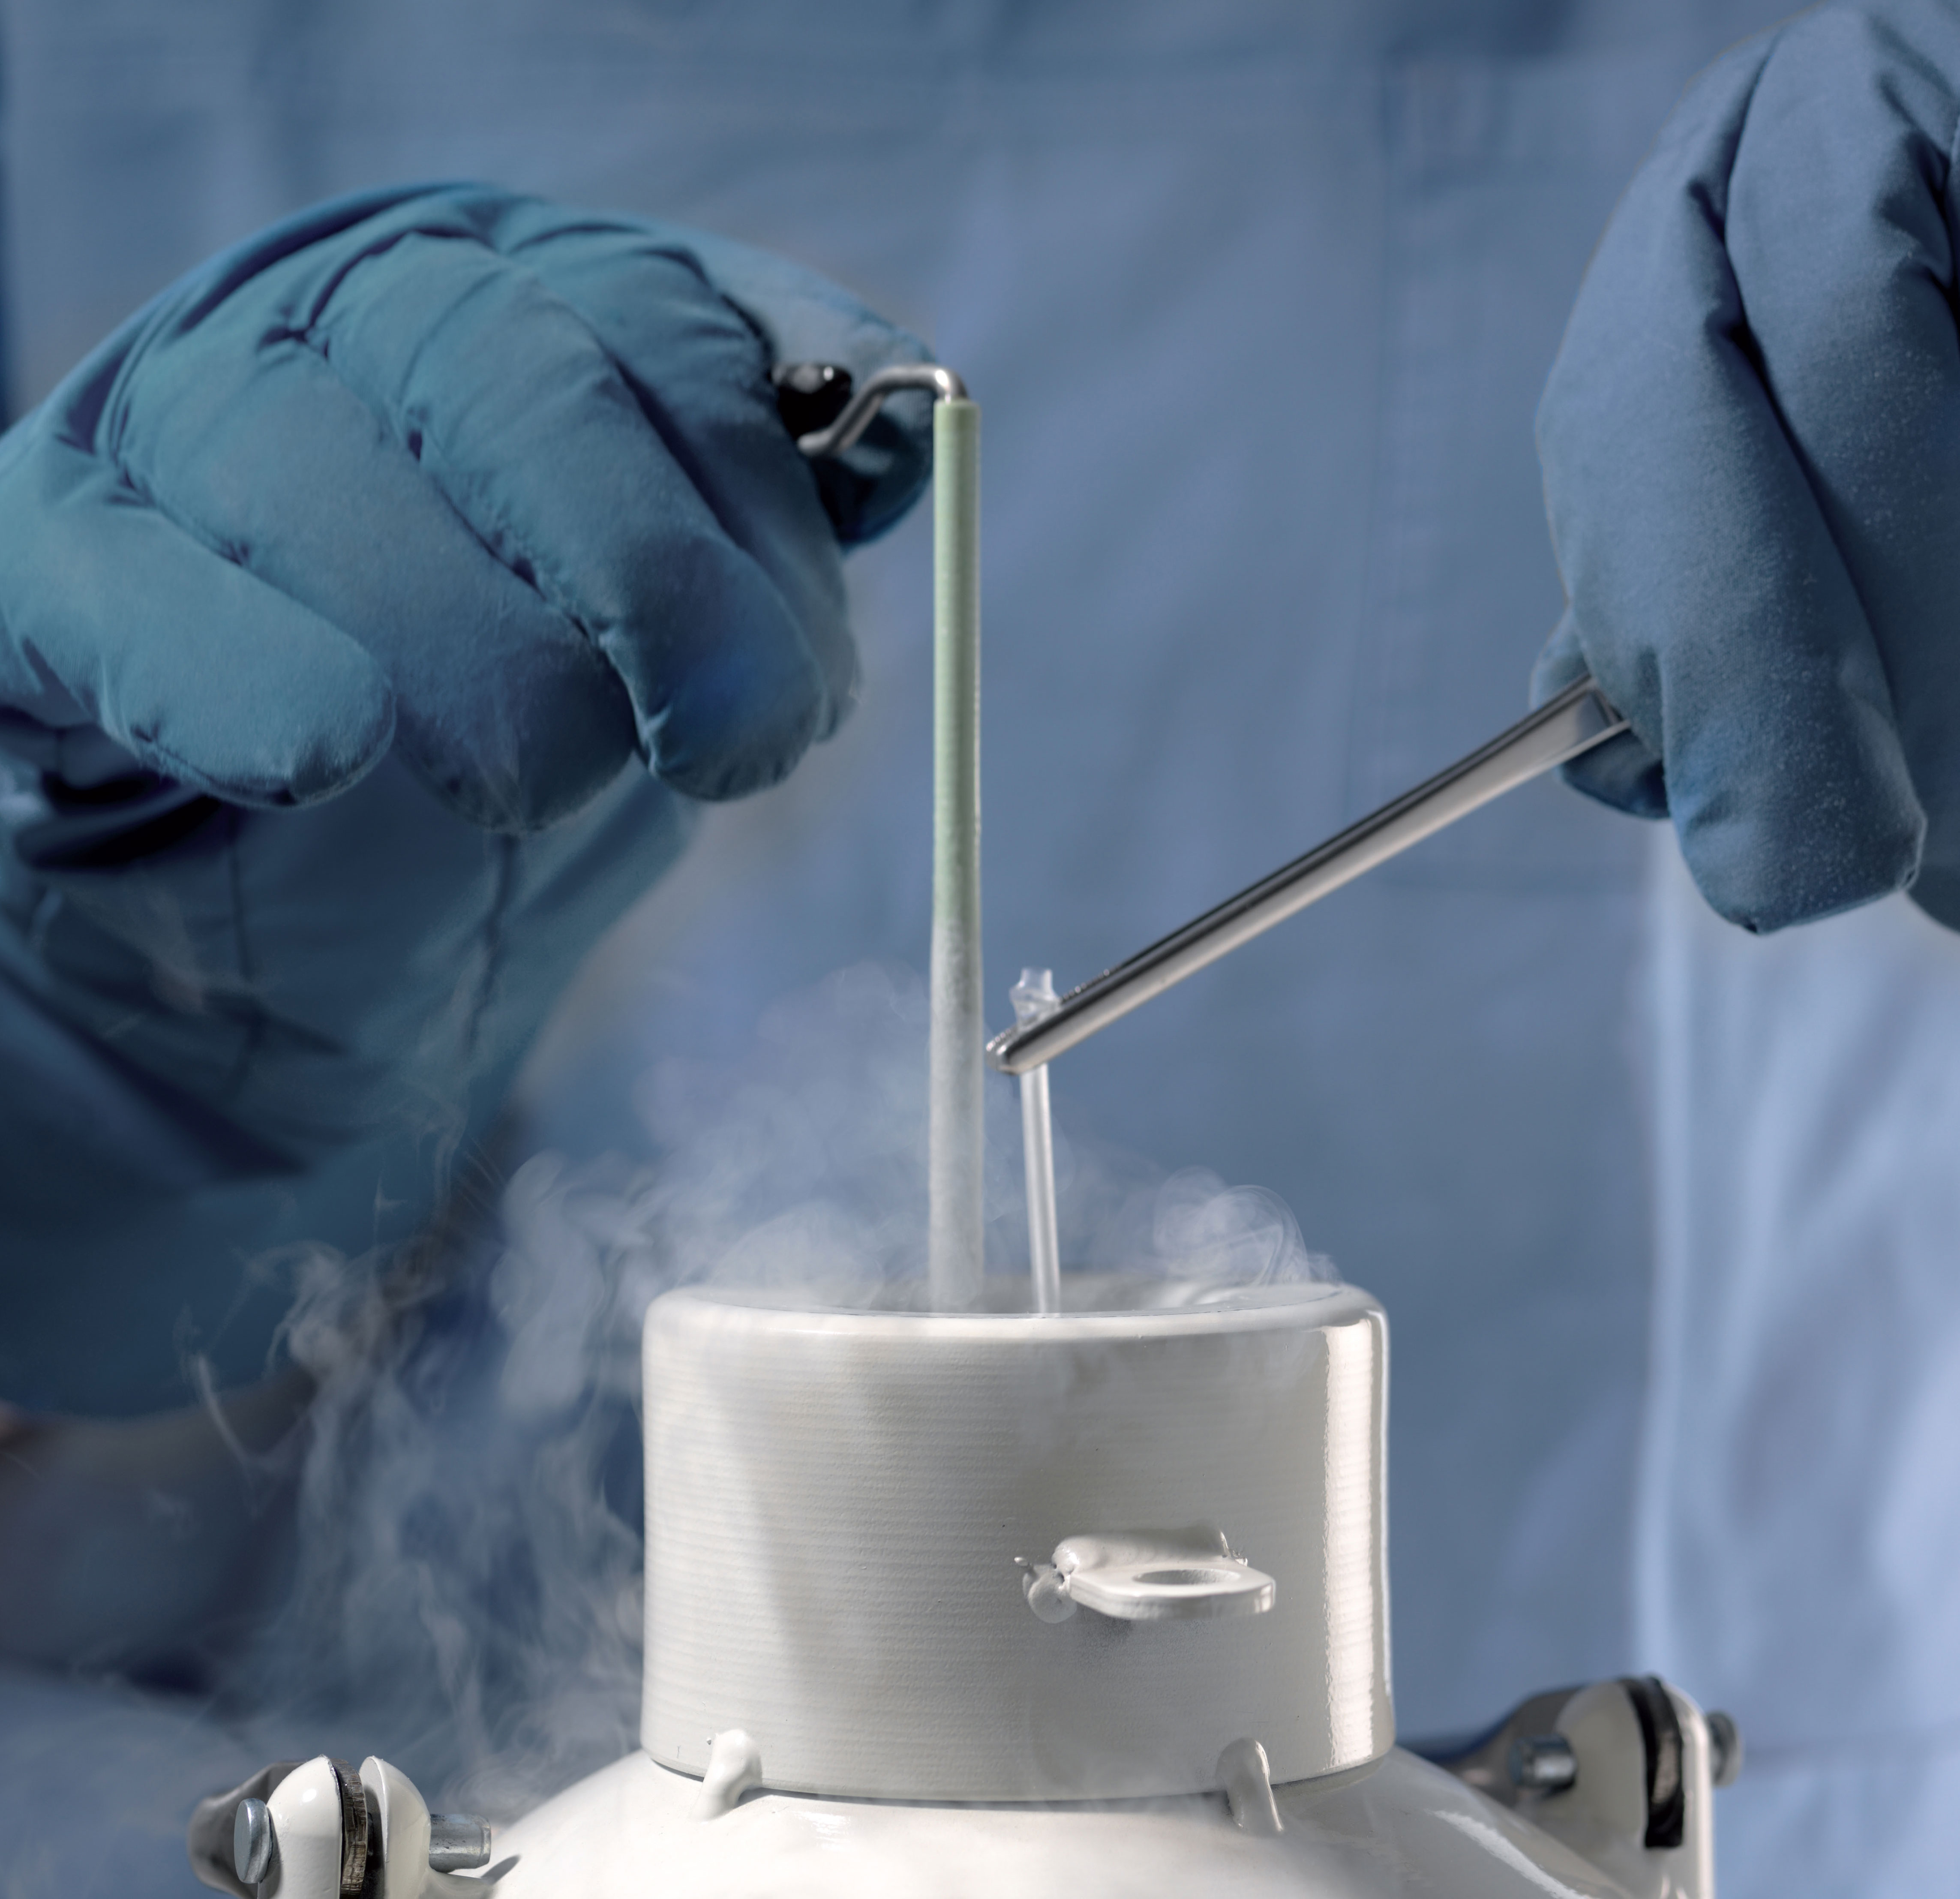 Picture showing how a hermetically sealed cryogenic straw is placed in a storage tank containing liquid nitrogen │ © 2022 Next Fertility IVF Prof. Zech • Member of Next Clinics